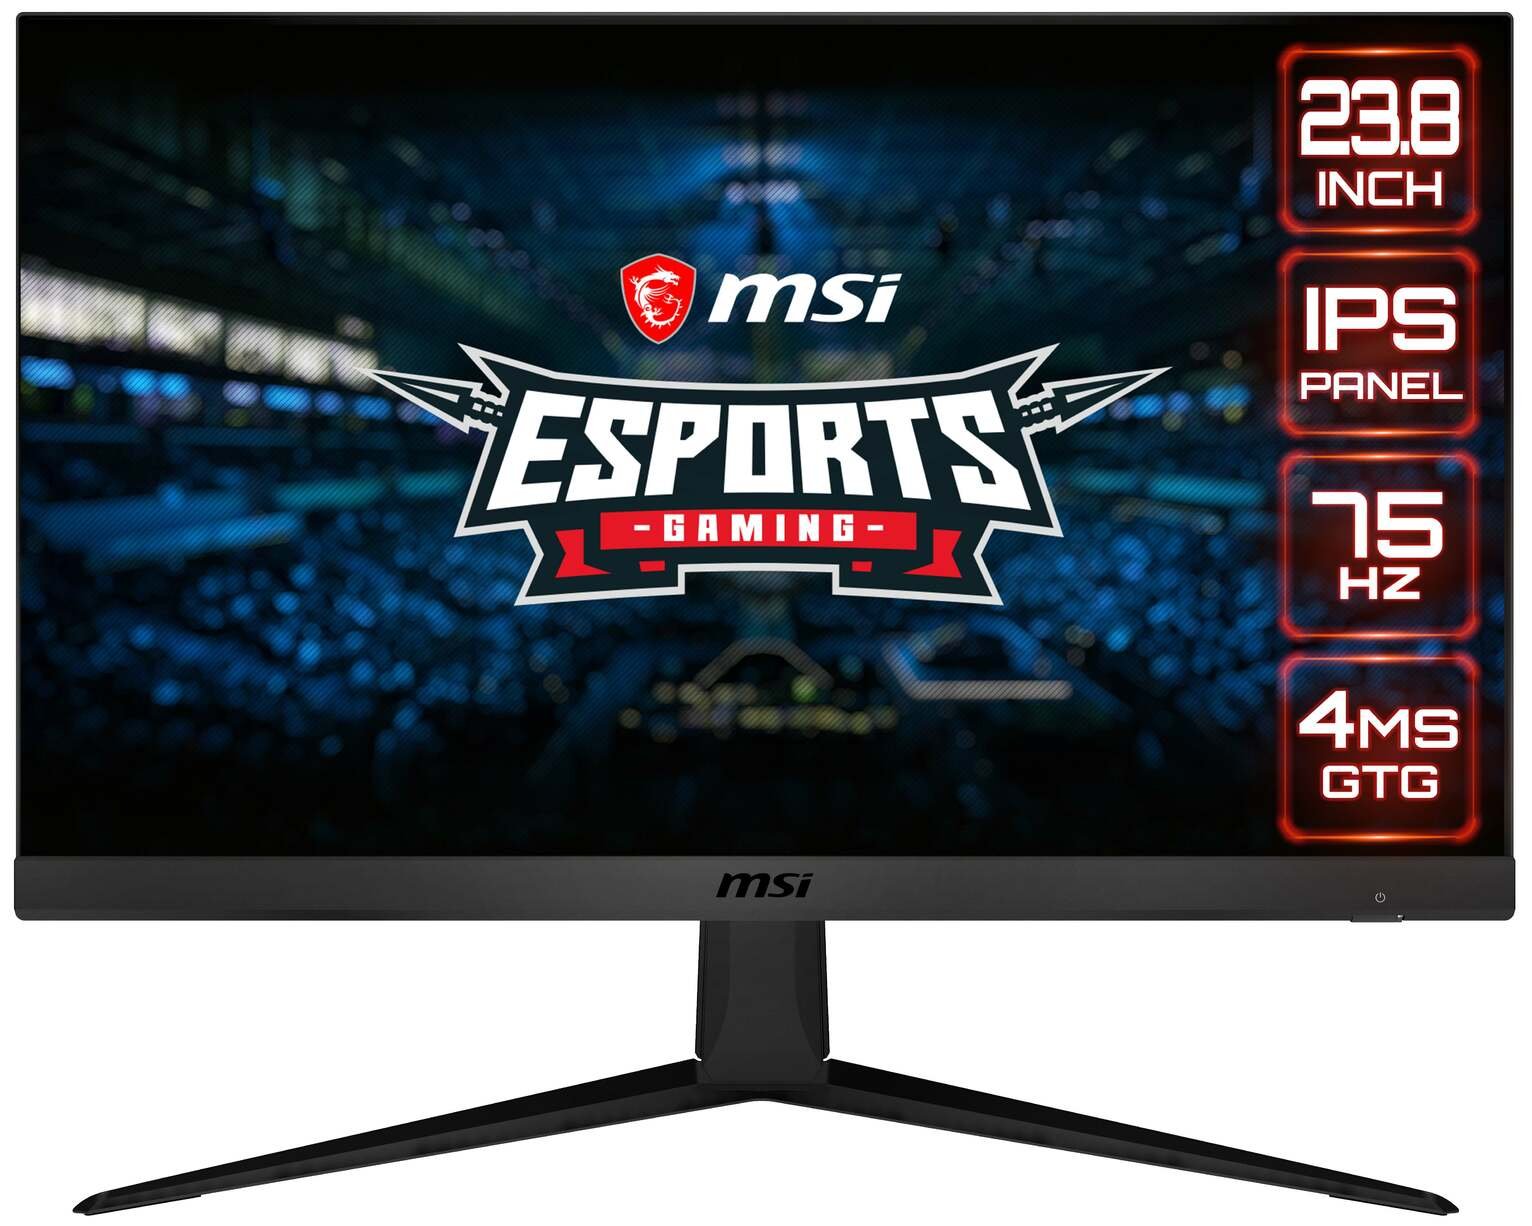 MSI G241V 23.8in 75Hz FHD IPS Gaming Monitor Review